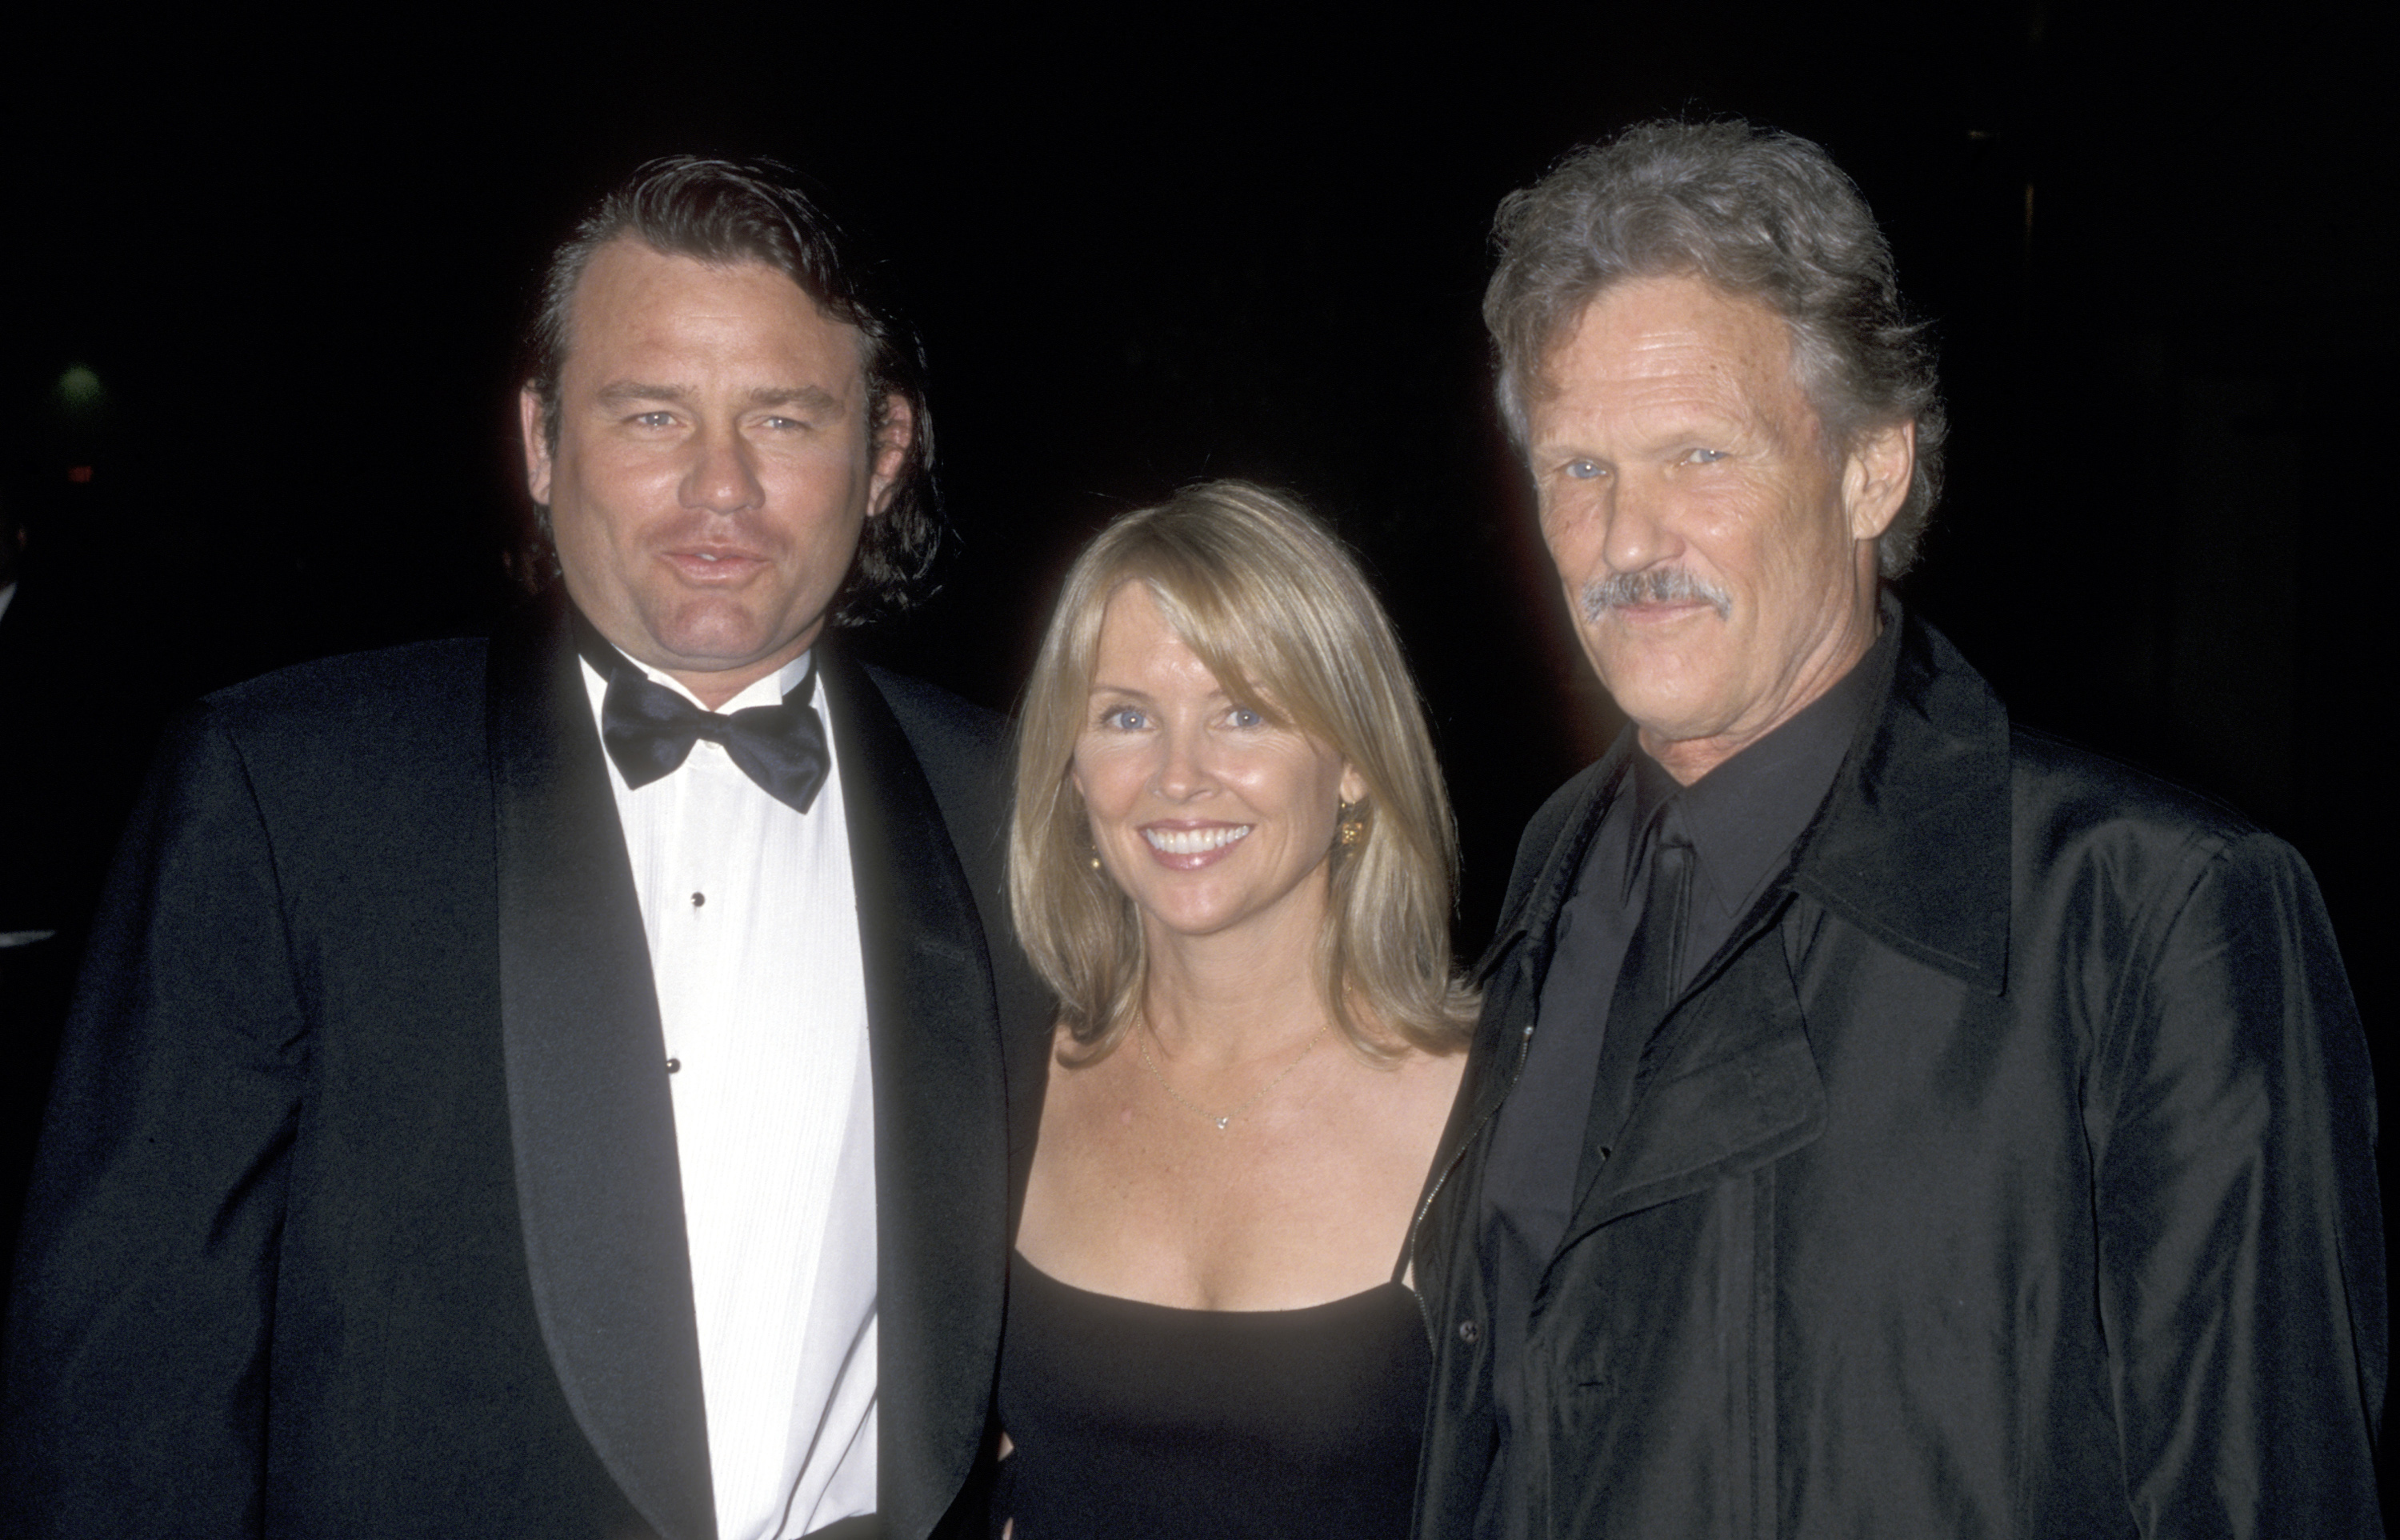 Kris Kristofferson, his daughter Tracy Kristofferson, and Tracy's husband Richard Tyson attend the Ninth Annual Diversity Awards on November 17, 2001, at Hollywood and Highland's Ballroom in Hollywood, California. | Source: Getty Images